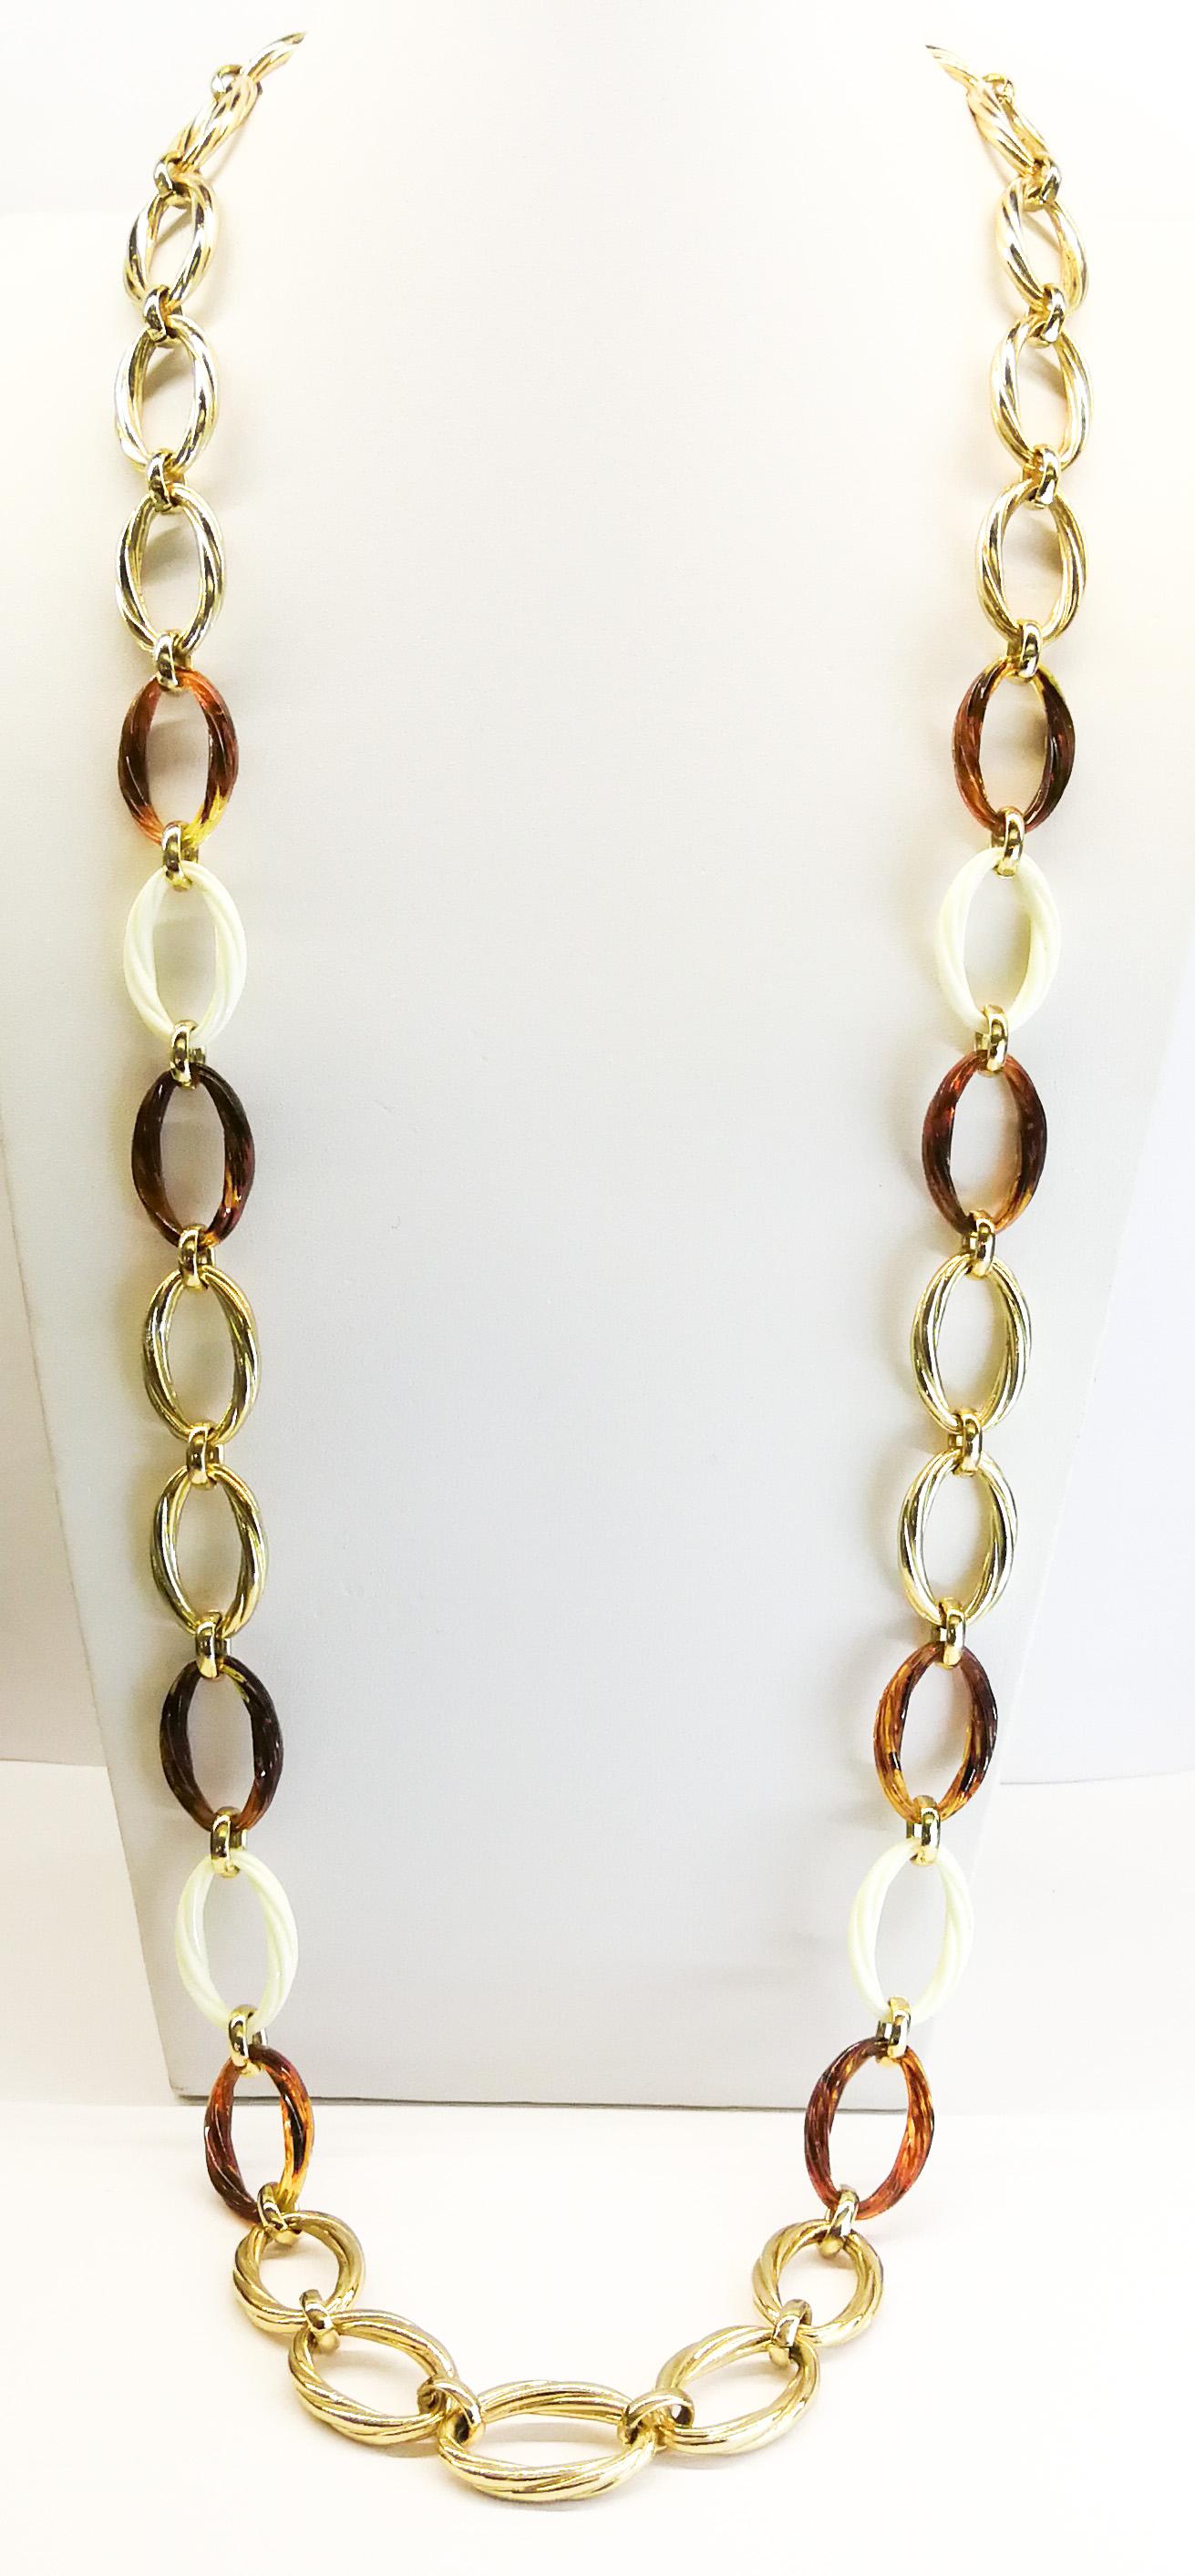 A very elegant, and wearable, very long chain necklace, with mixed faux ivory and tortoiseshell links, interspersed with the twisted gilt metal links, giving a smart but relaxed feel. Made in Germany by Henkel and Grosse, the celebrated and long